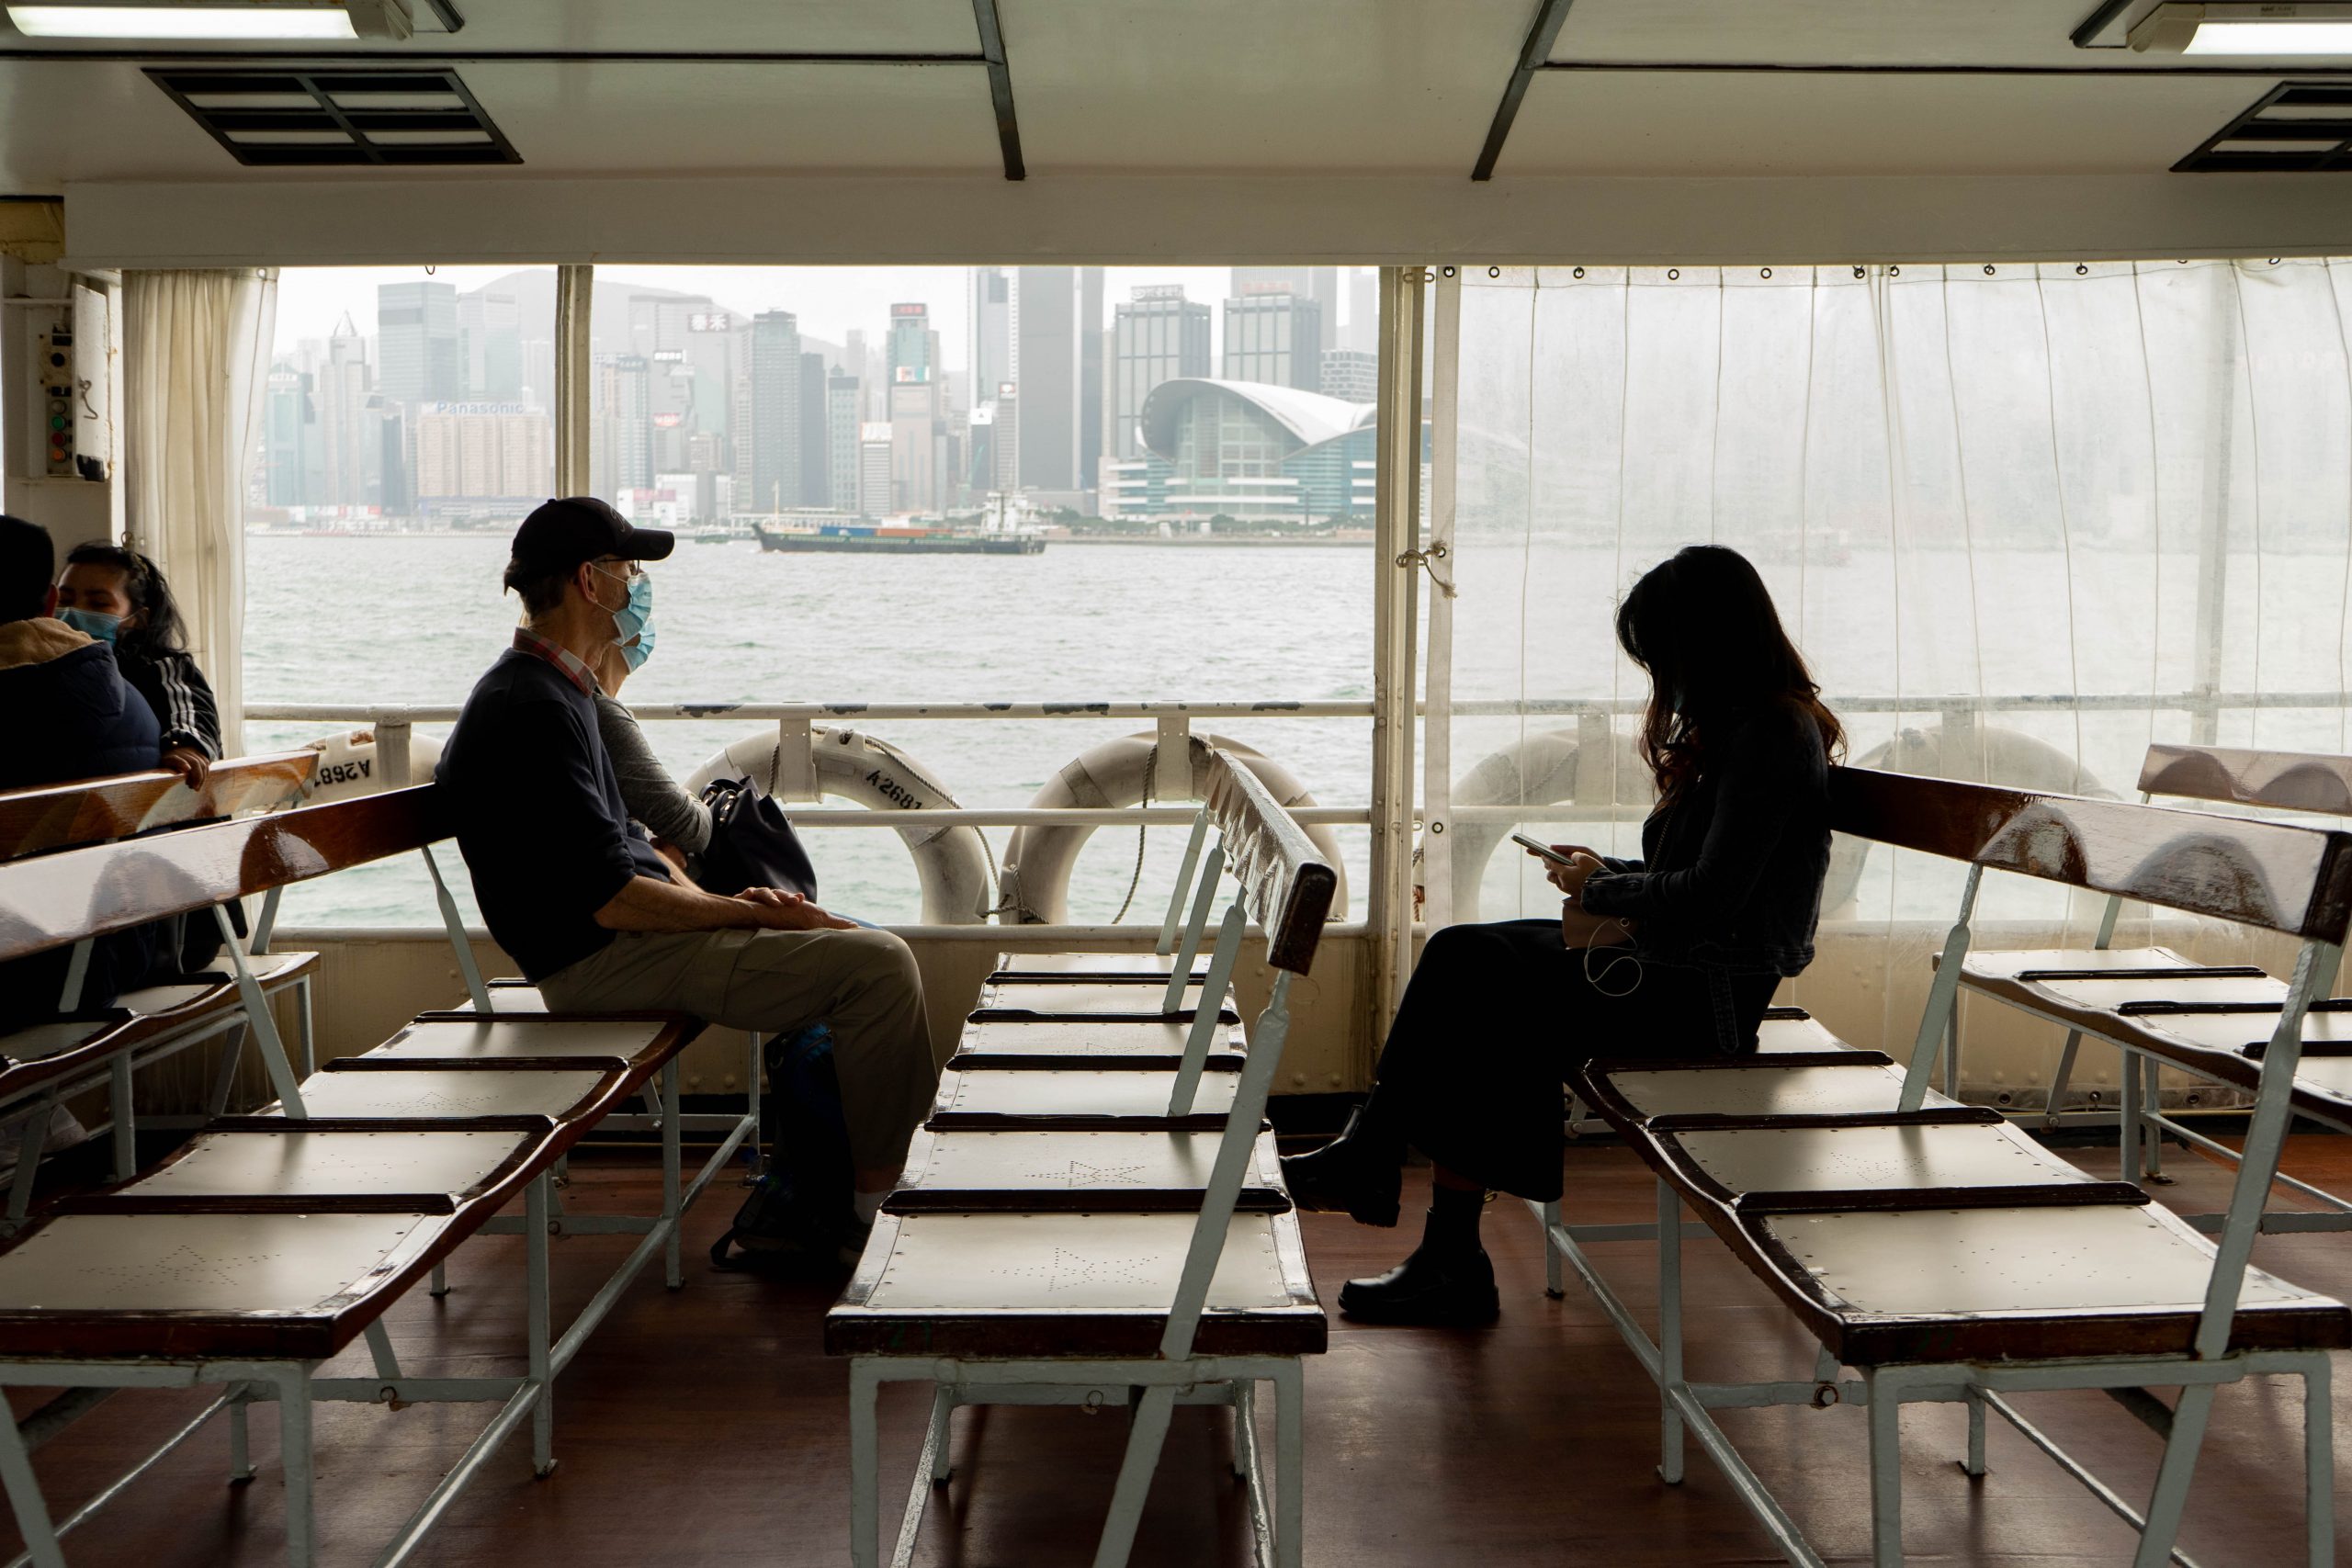 People wear masks and maintain physical distance while riding a ferry. Photo by Big Dodzy.